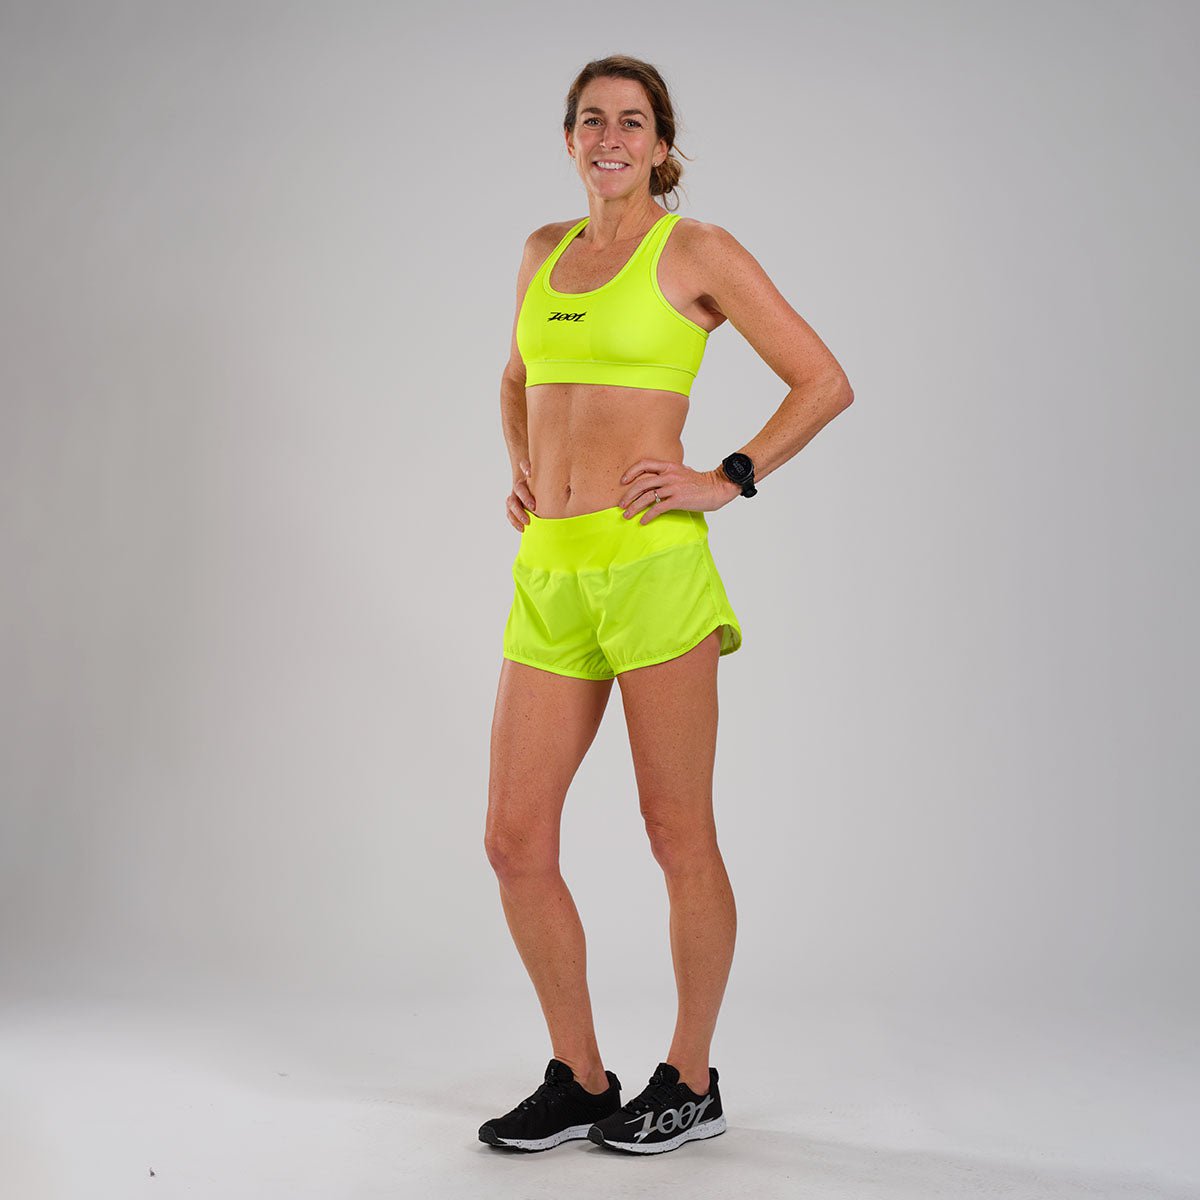 Female runner on beach with sports bra and shorts. Midsection closeup of  body of a woman athlete running with speed fast training cardio wearing  neon yellow activewear outfit. Active lifestyle. Stock Photo